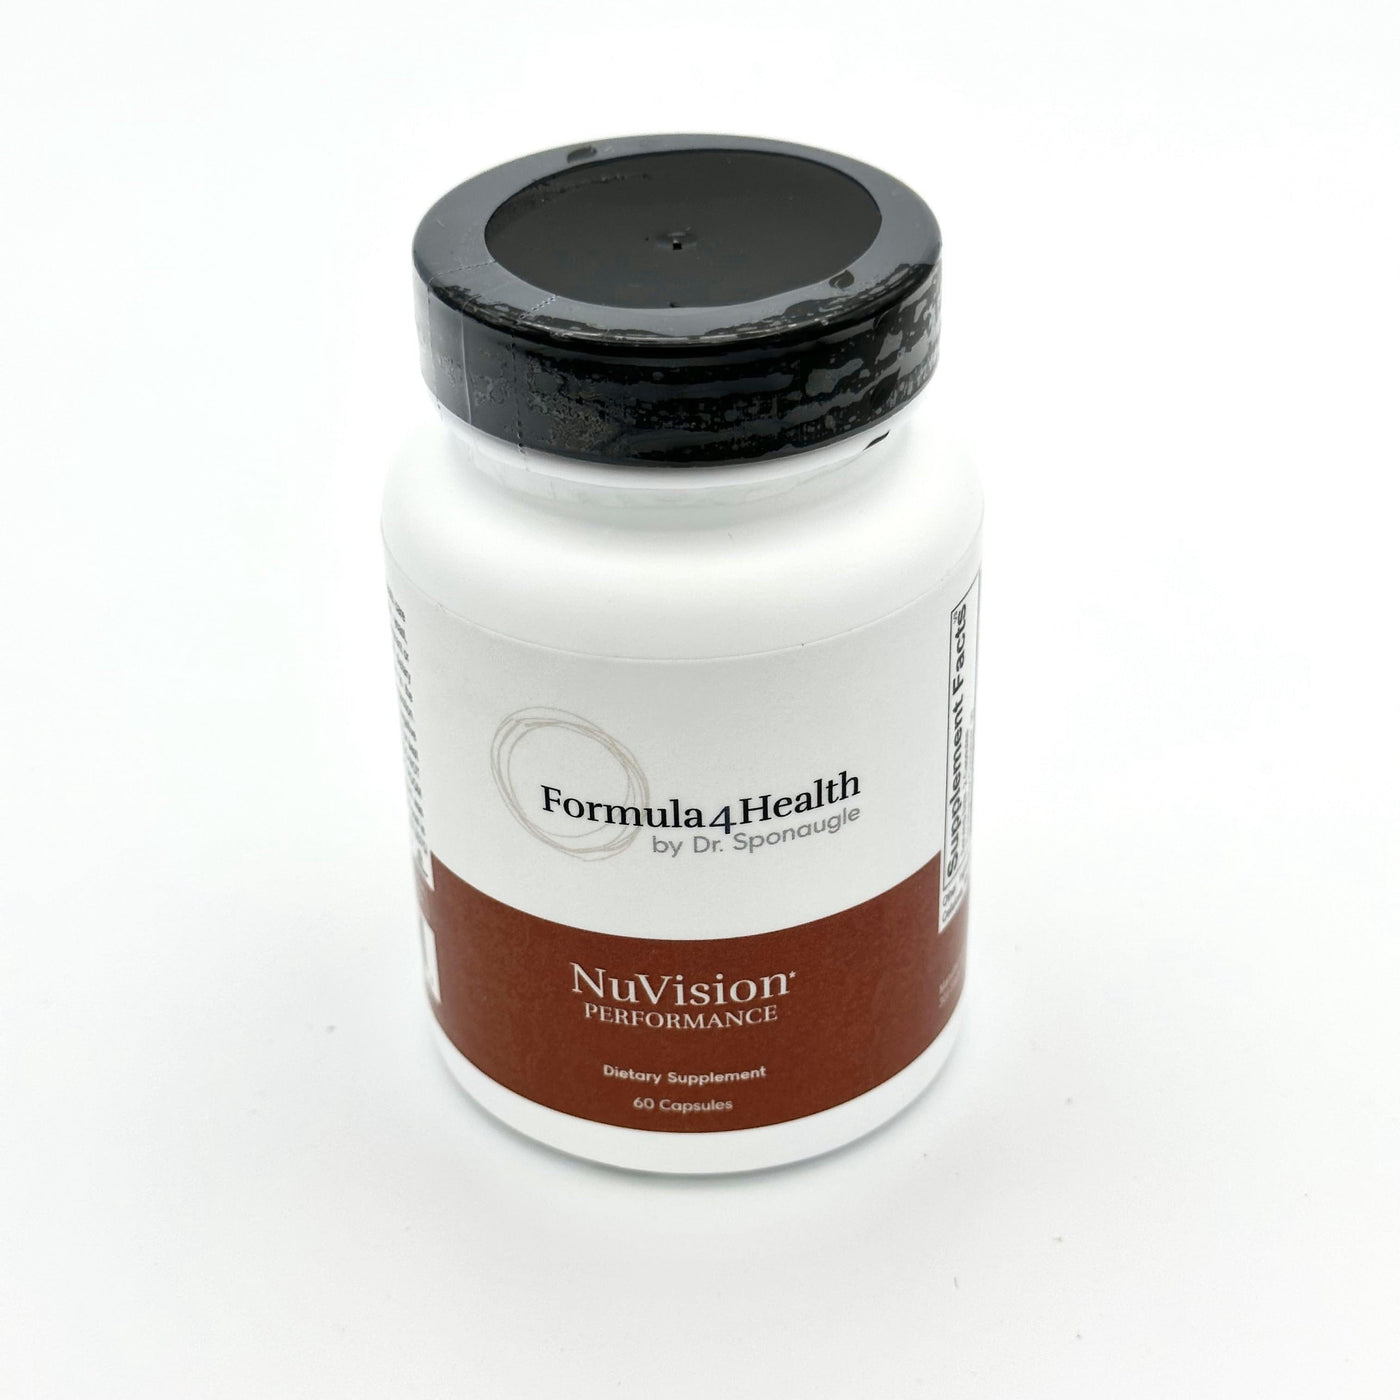 NuVision by  Formula 4 Health. Available for online purchase at  Formula For Health.